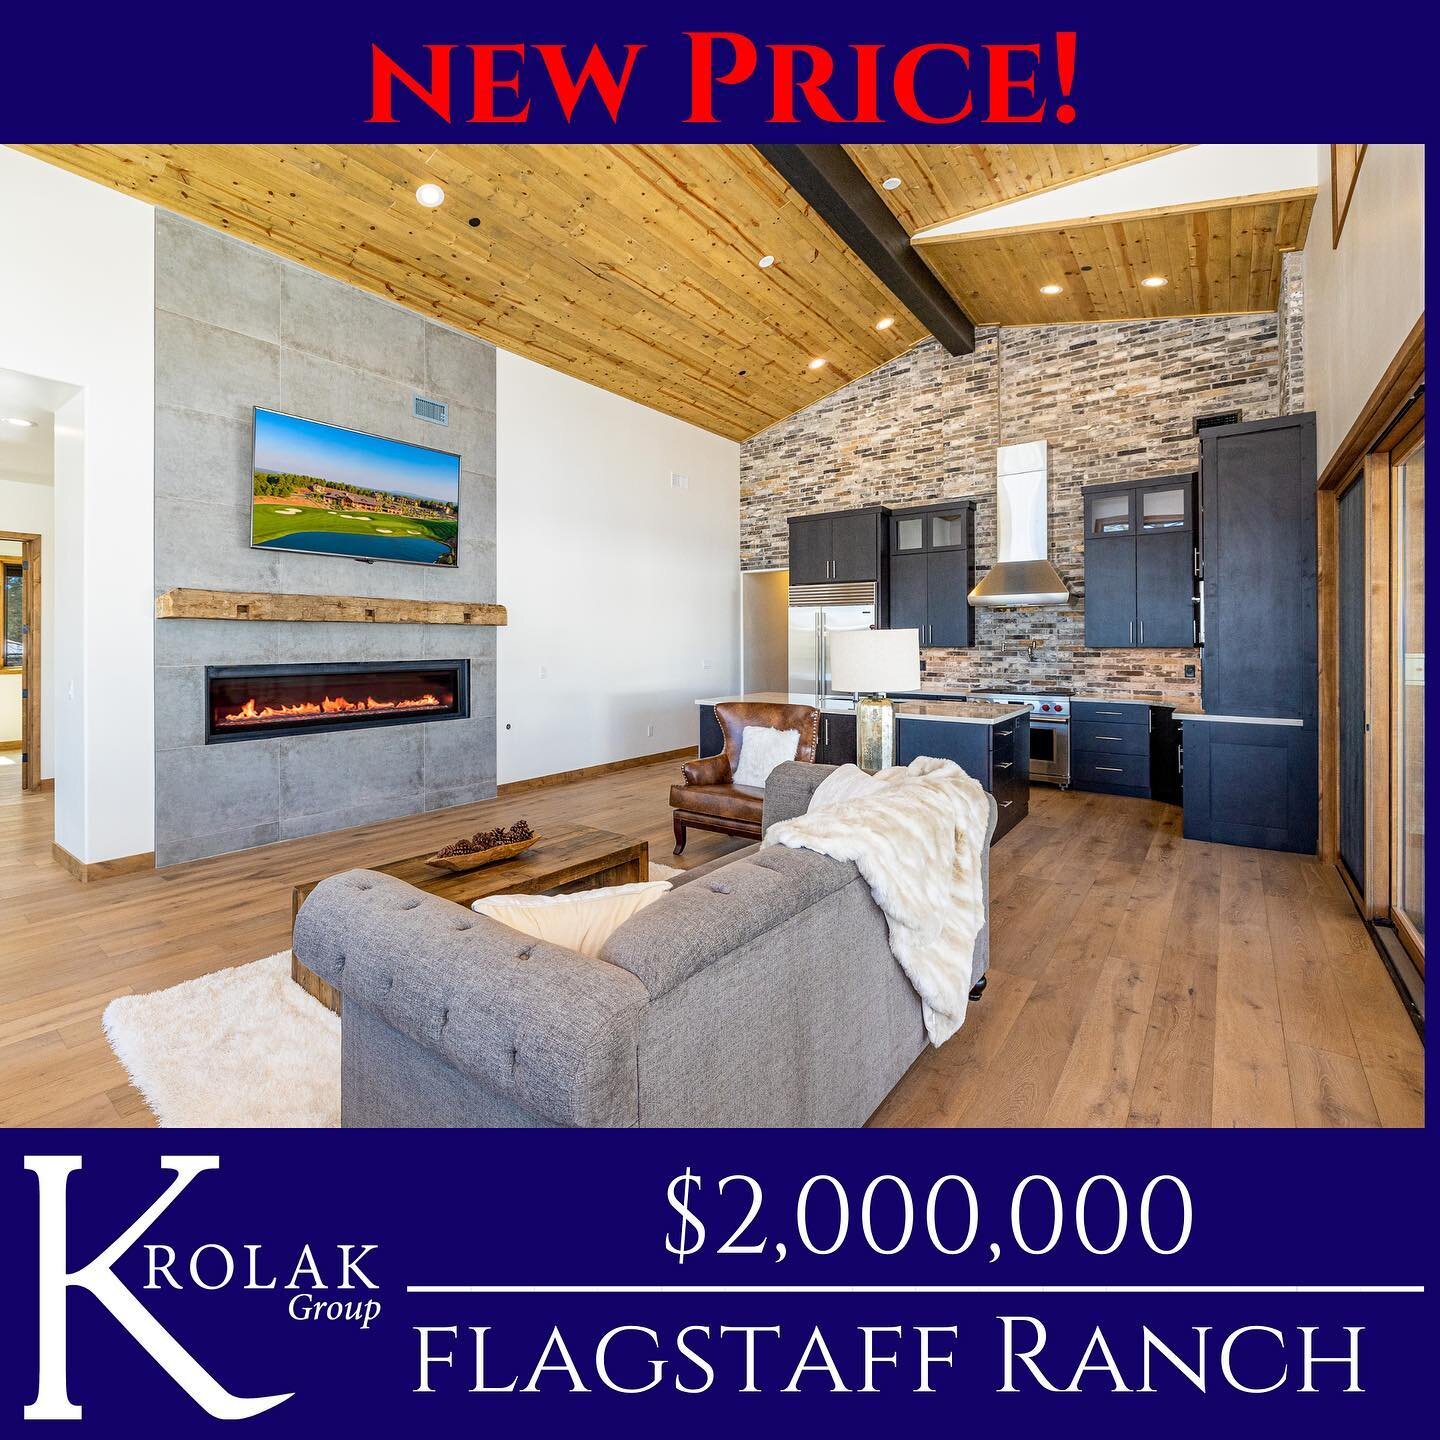 Flagstaff Ranch New Build🌲

4 Bed | 4 Bath | 4 Car Garage | 3,660 sqft 

Thoughtfully designed modern cabin in the prestigious gated community of Flagstaff Ranch. Complete with a heated driveway, two laundry rooms, two primary suites, melrose oak wo